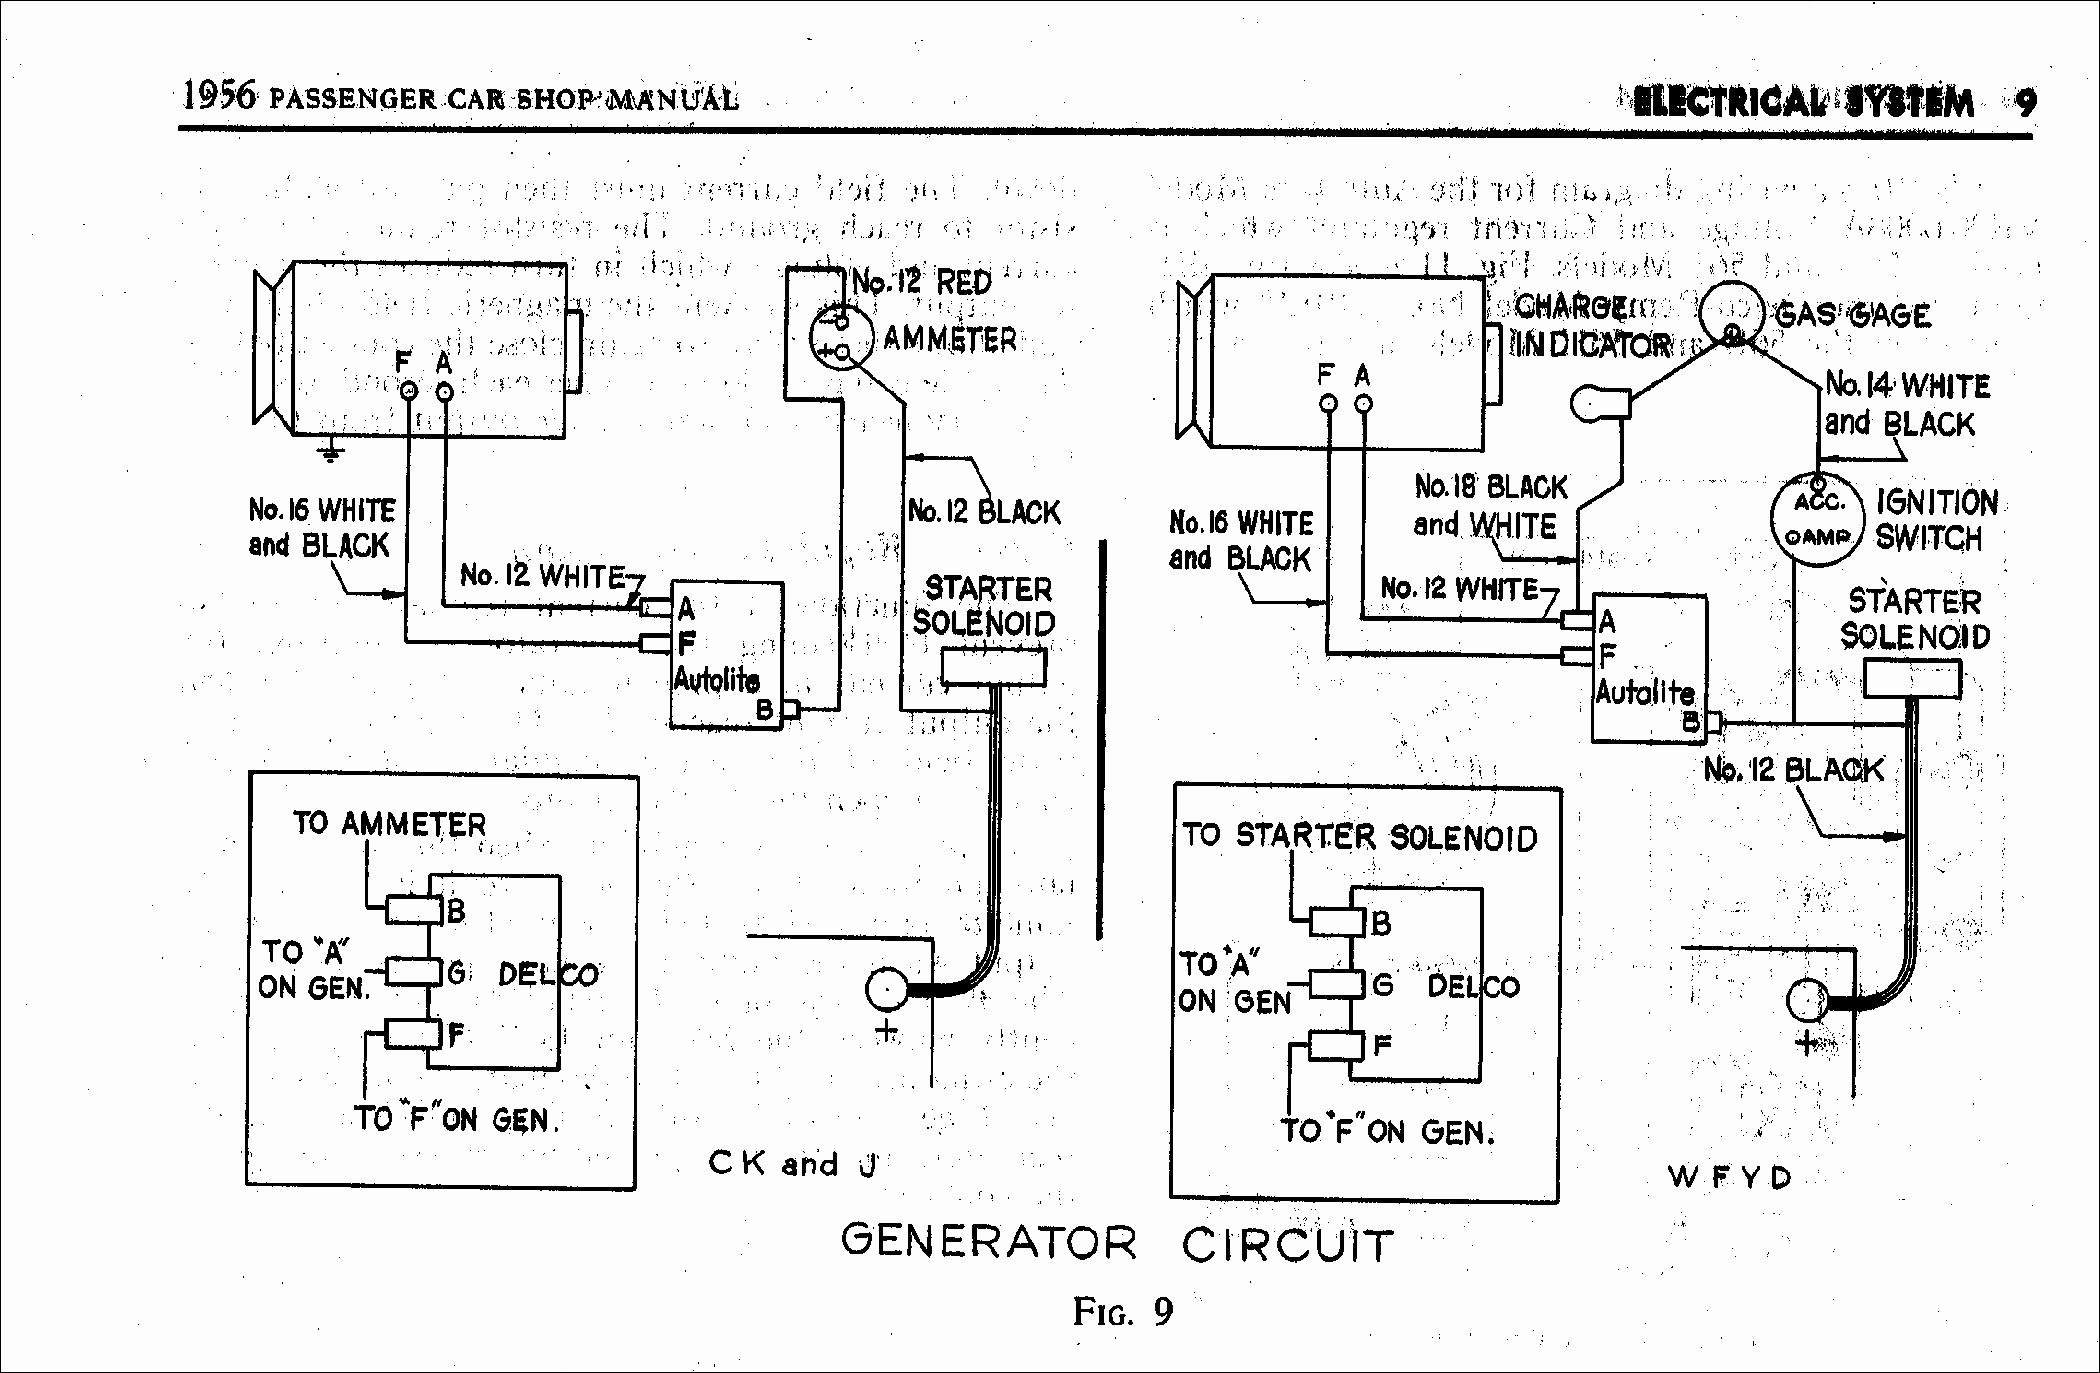 Club Car Ignition Switch Wiring Diagram from mainetreasurechest.com